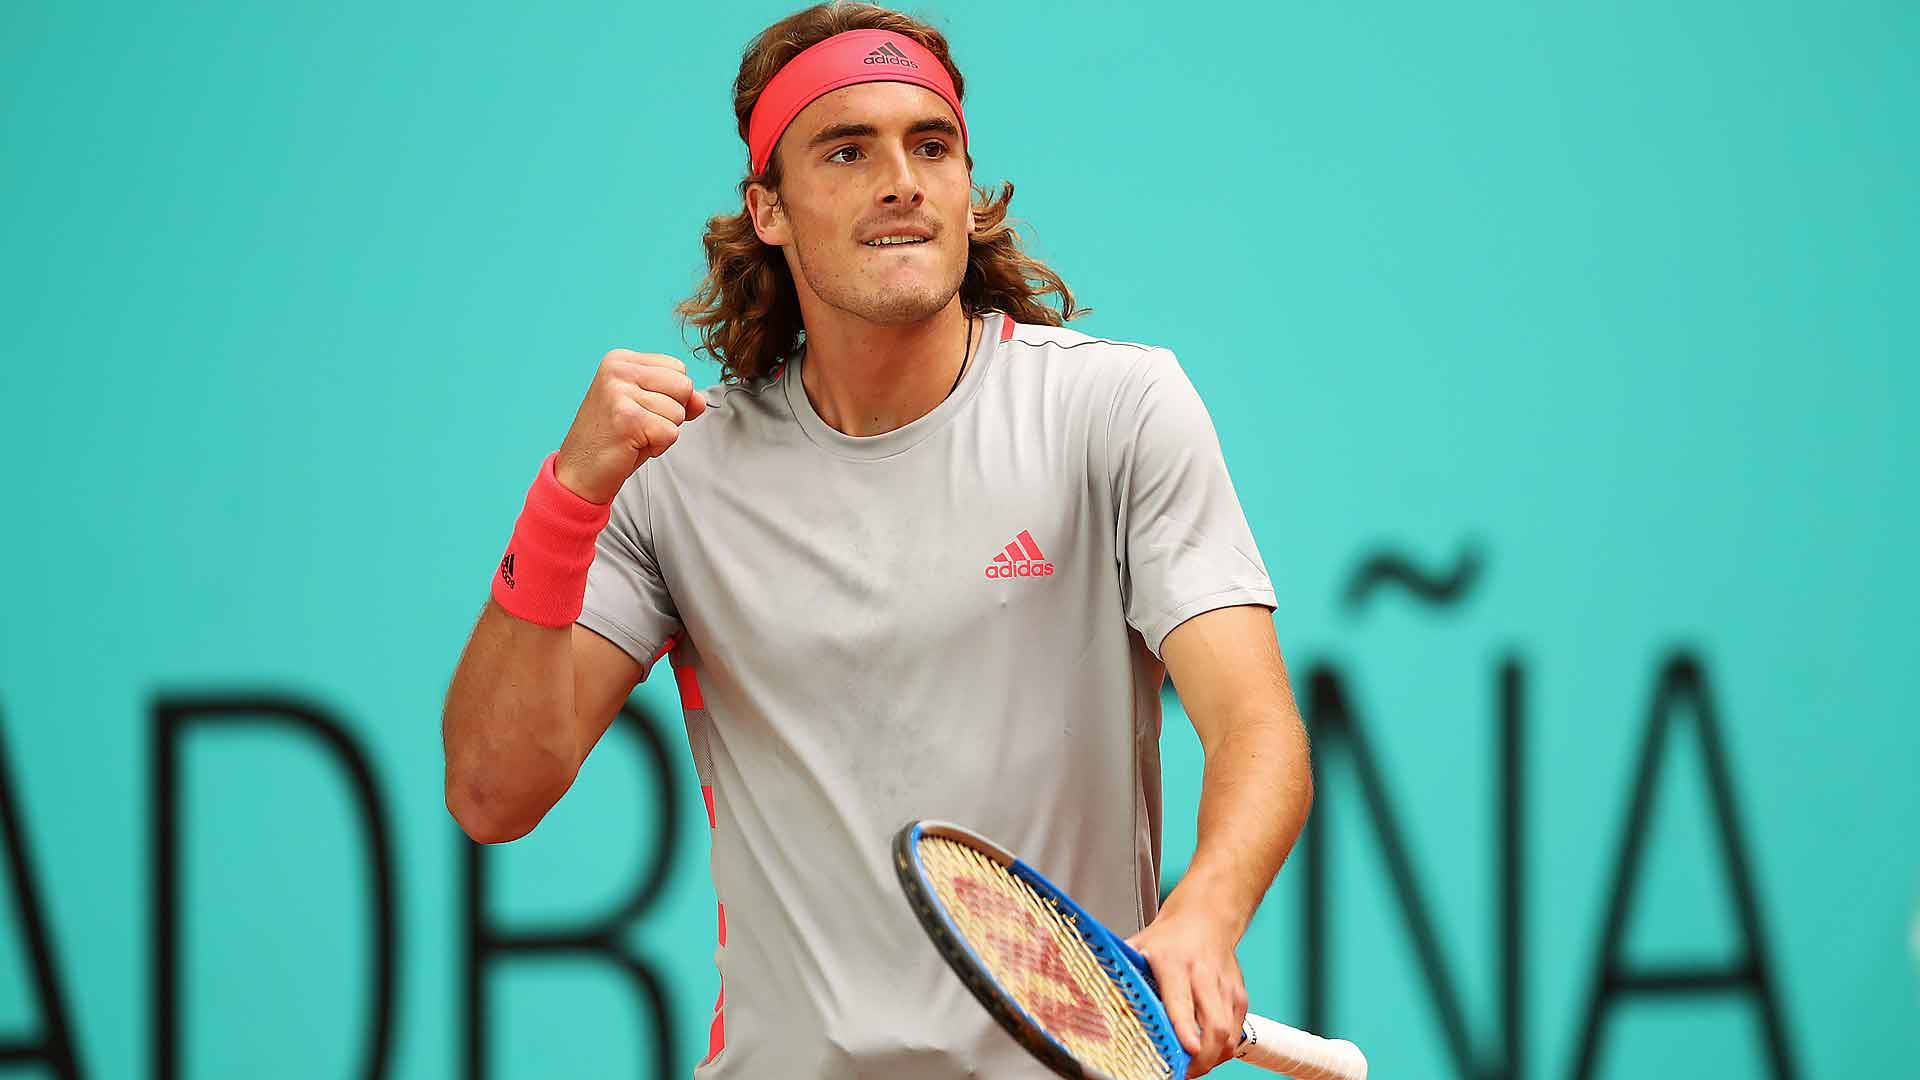 Stefanos Tsitsipas With Clenched Fist